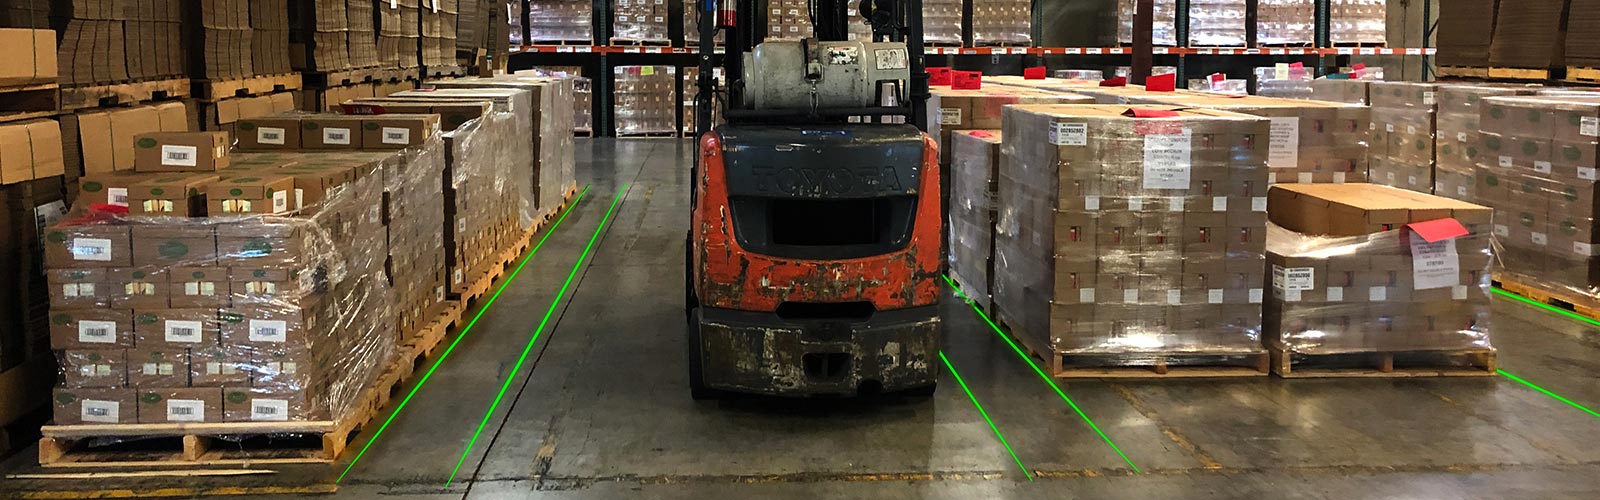 Laser lines marking staging lanes in a warehouse